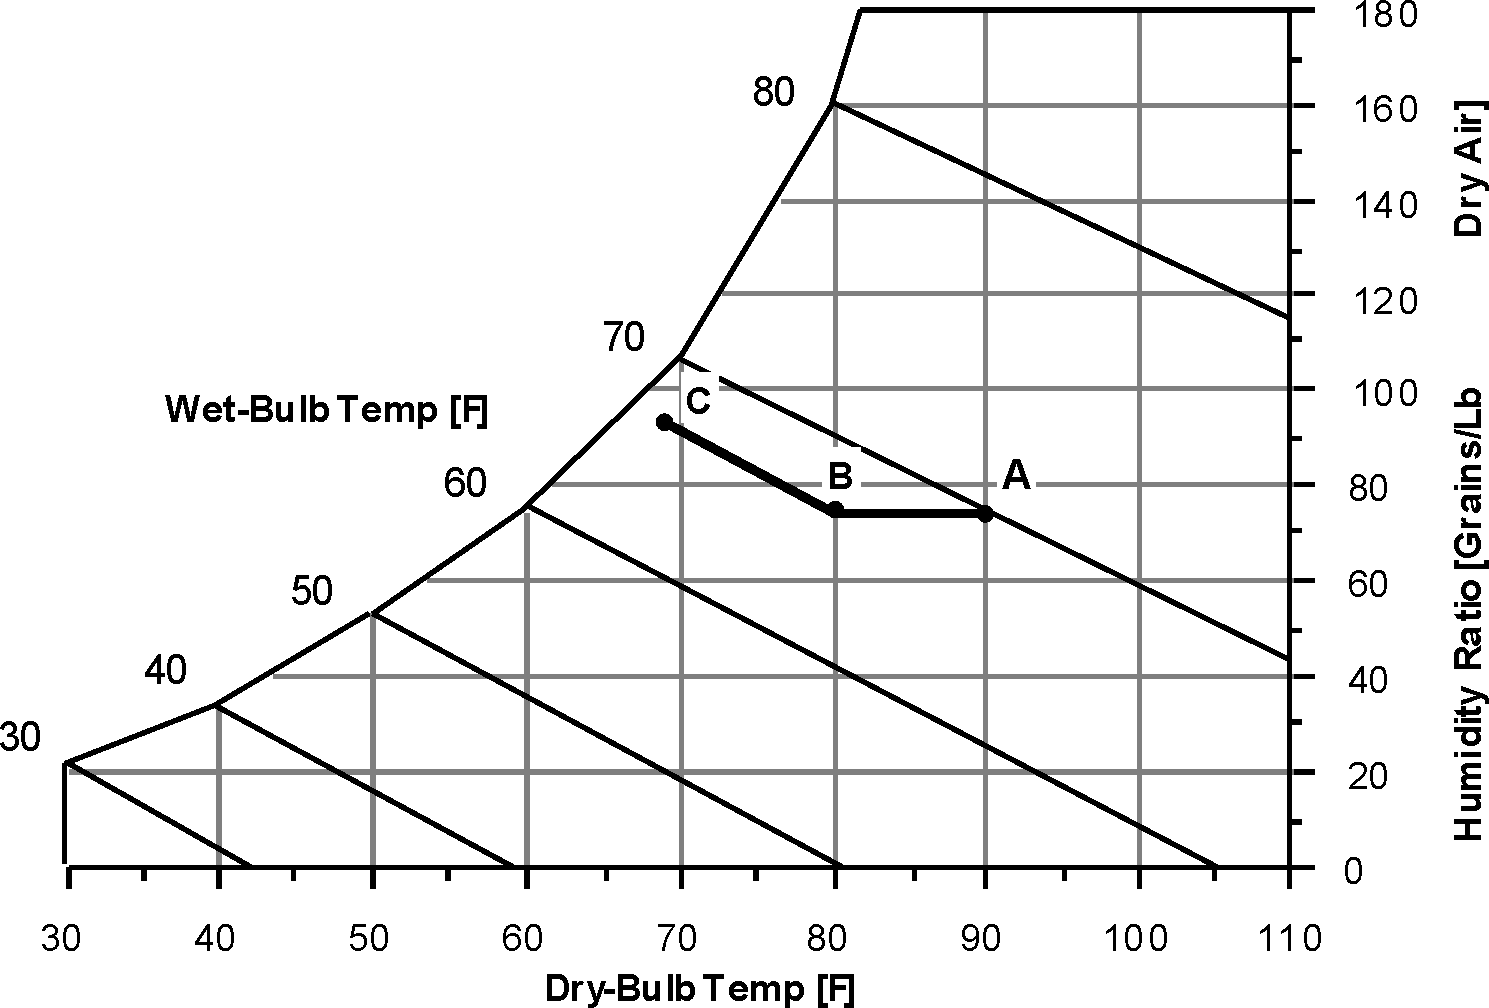 Thermodynamic Process for Supply Air Through Two Stage Evaporative Cooler [fig:thermodynamic-process-for-supply-air-through]